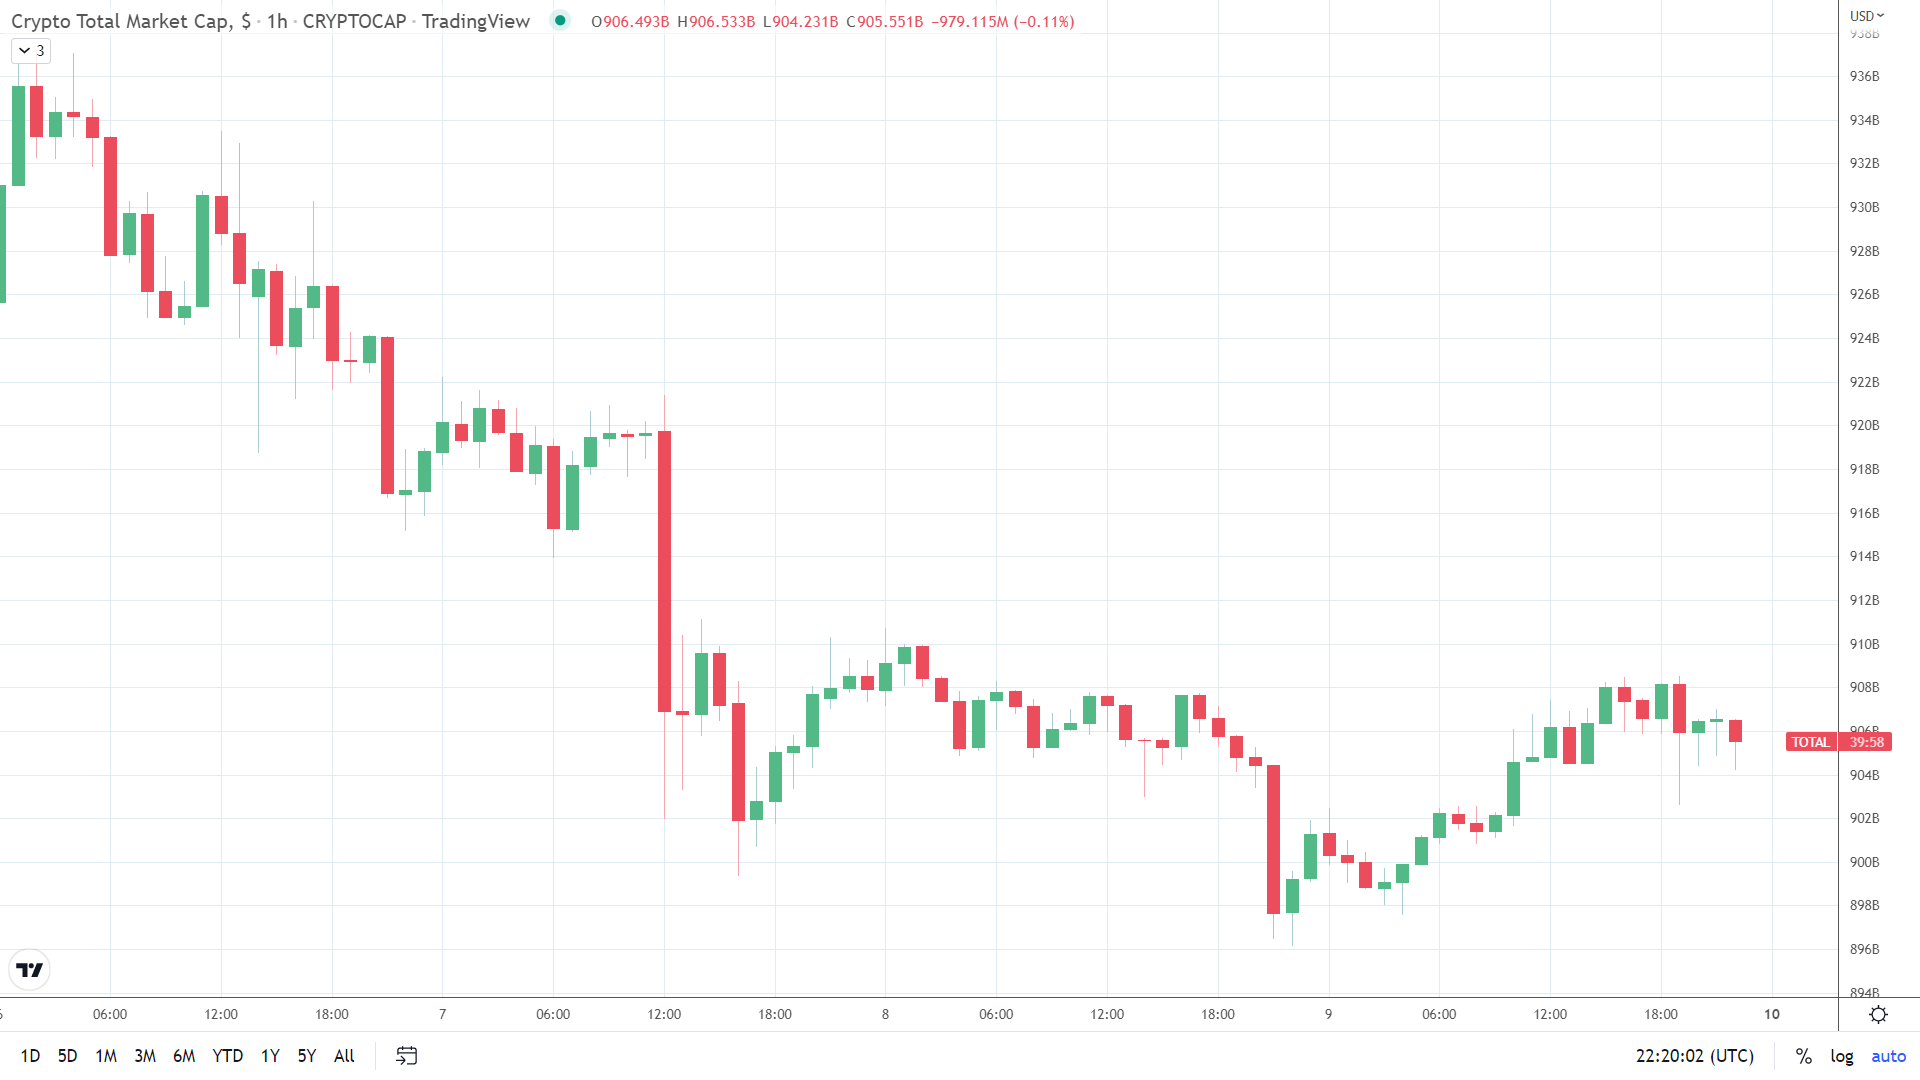 Crypto market steadies after four day pullback.